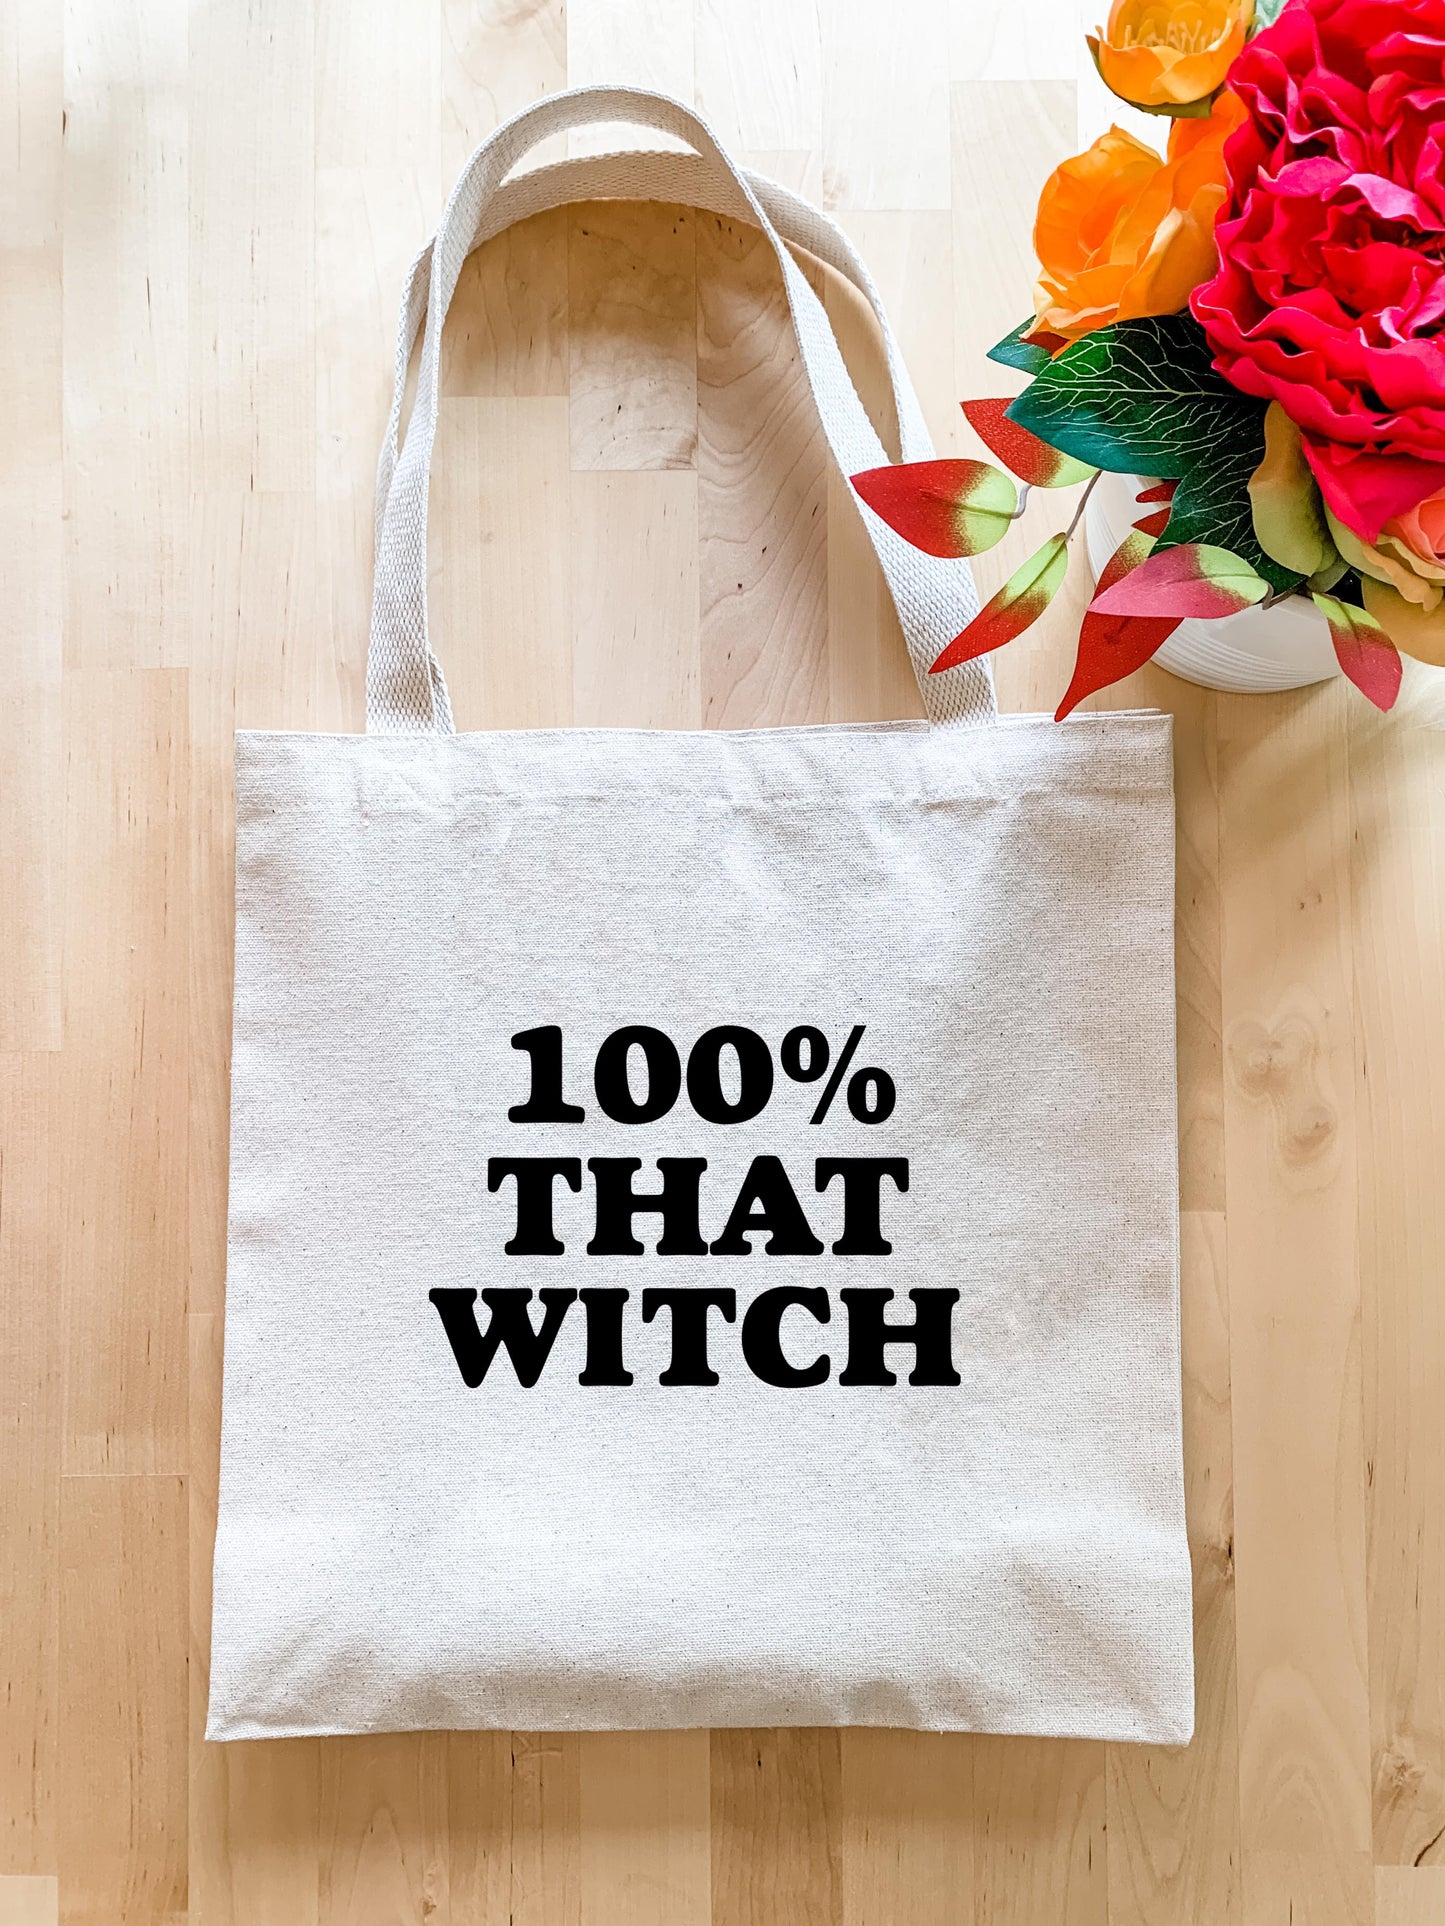 100% That Witch - Tote Bag - MoonlightMakers